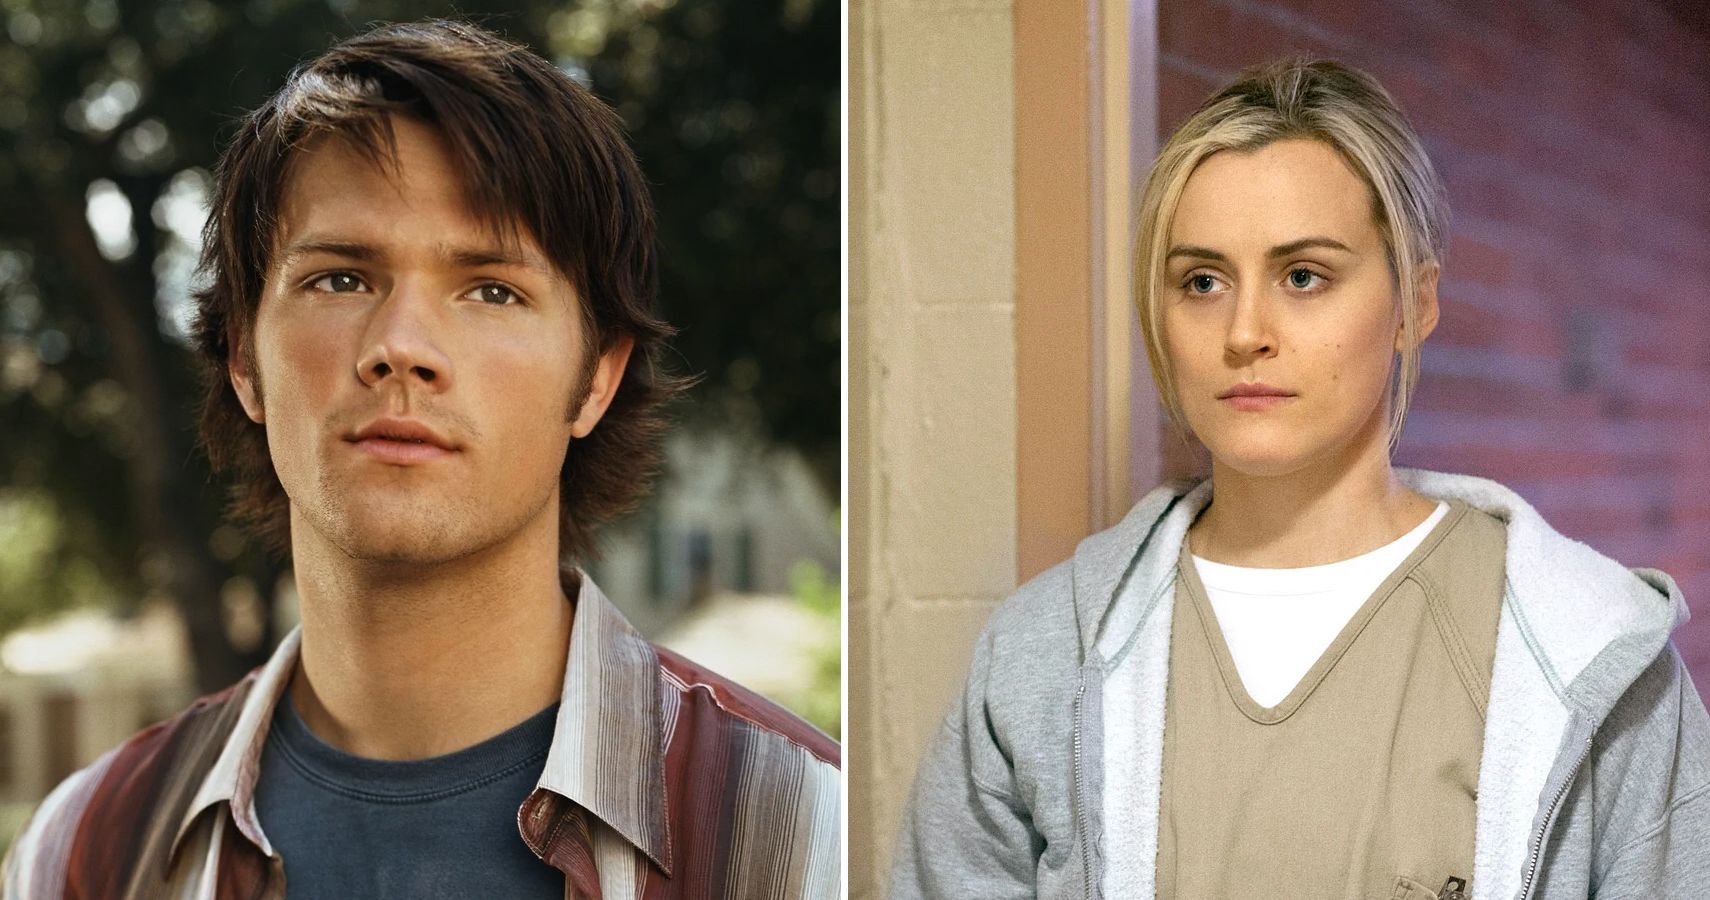 10 Annoying TV Characters That Viewers Are Supposed To Like, But Can't Stand